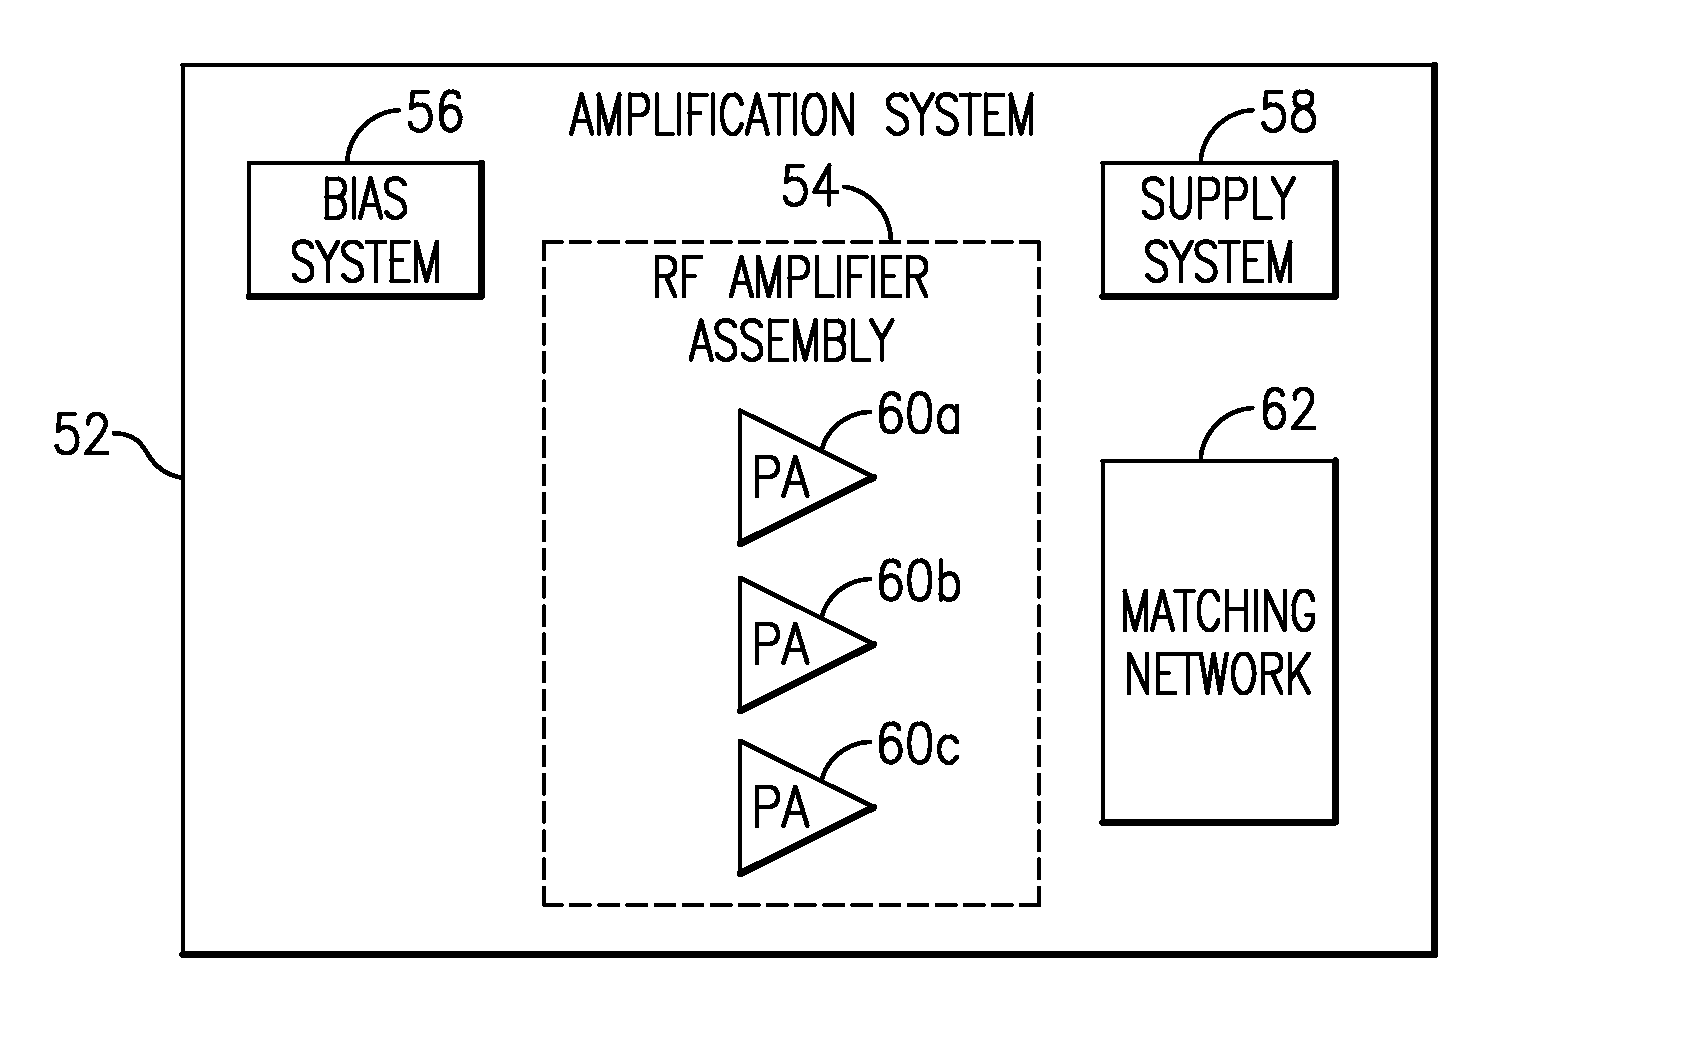 Multi-band power amplification system having enhanced efficiency through elimination of band selection switch